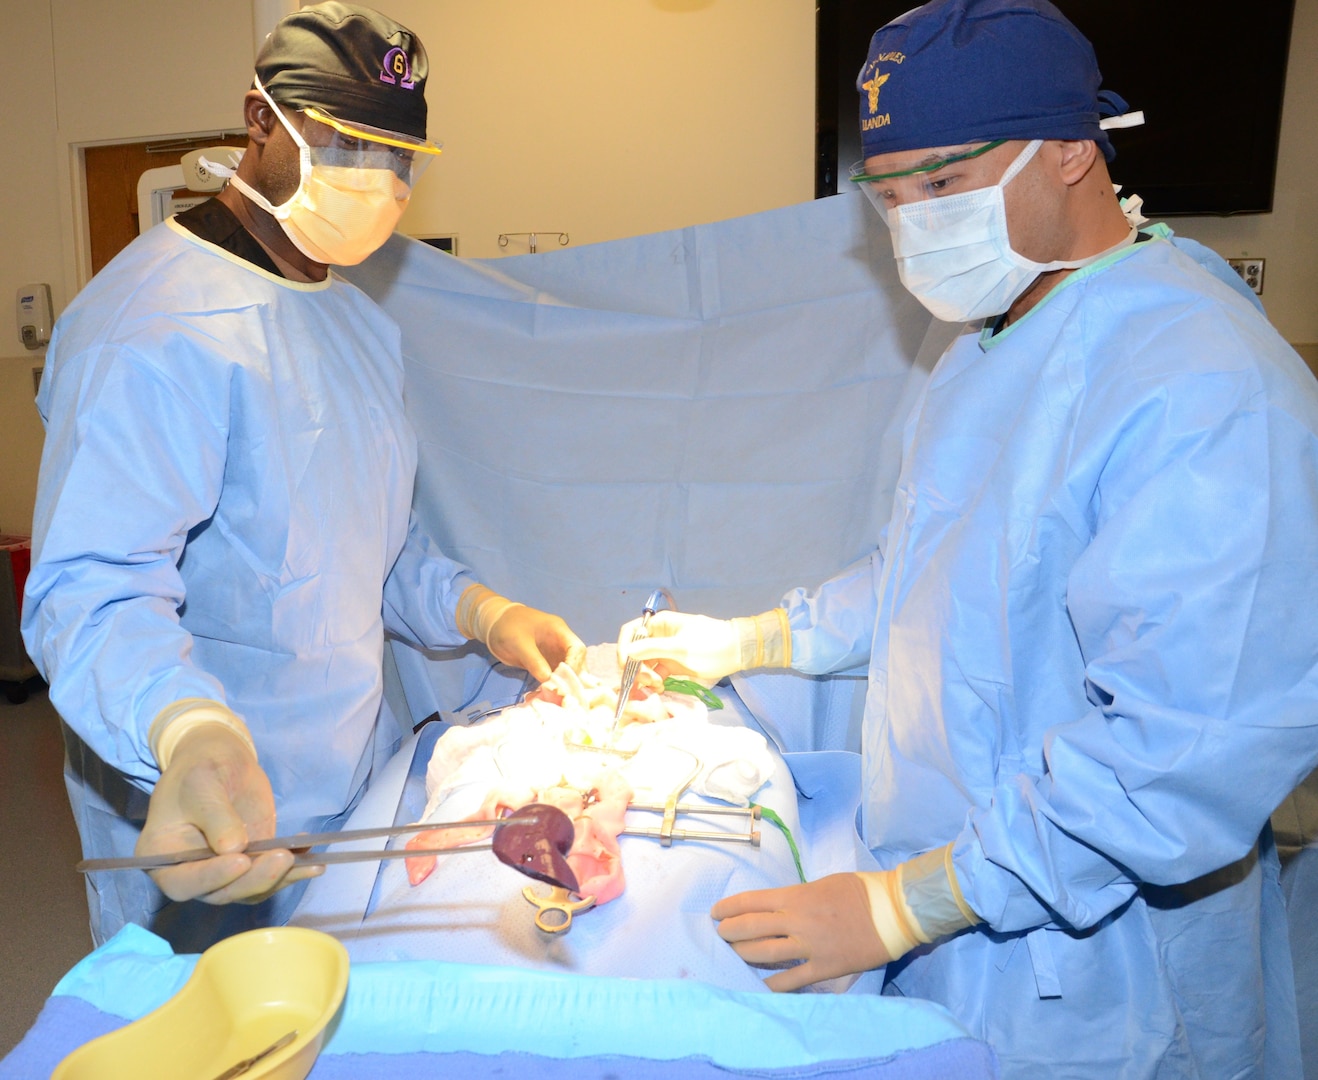 Petty Officer 1st Class Wesley Middleton, left, removes a simulated liver during a mock laparotomy assisted by Petty Officer 2nd Class Domenick Llanda. Both are instructors in the Medical Education and Training Campus Surgical Technologist program.  Army, Navy and Air Force ST students are becoming familiar with laparoscopic and laparotomy procedures, which are more universally practiced in the surgical field, after a curriculum update to move the training forward.